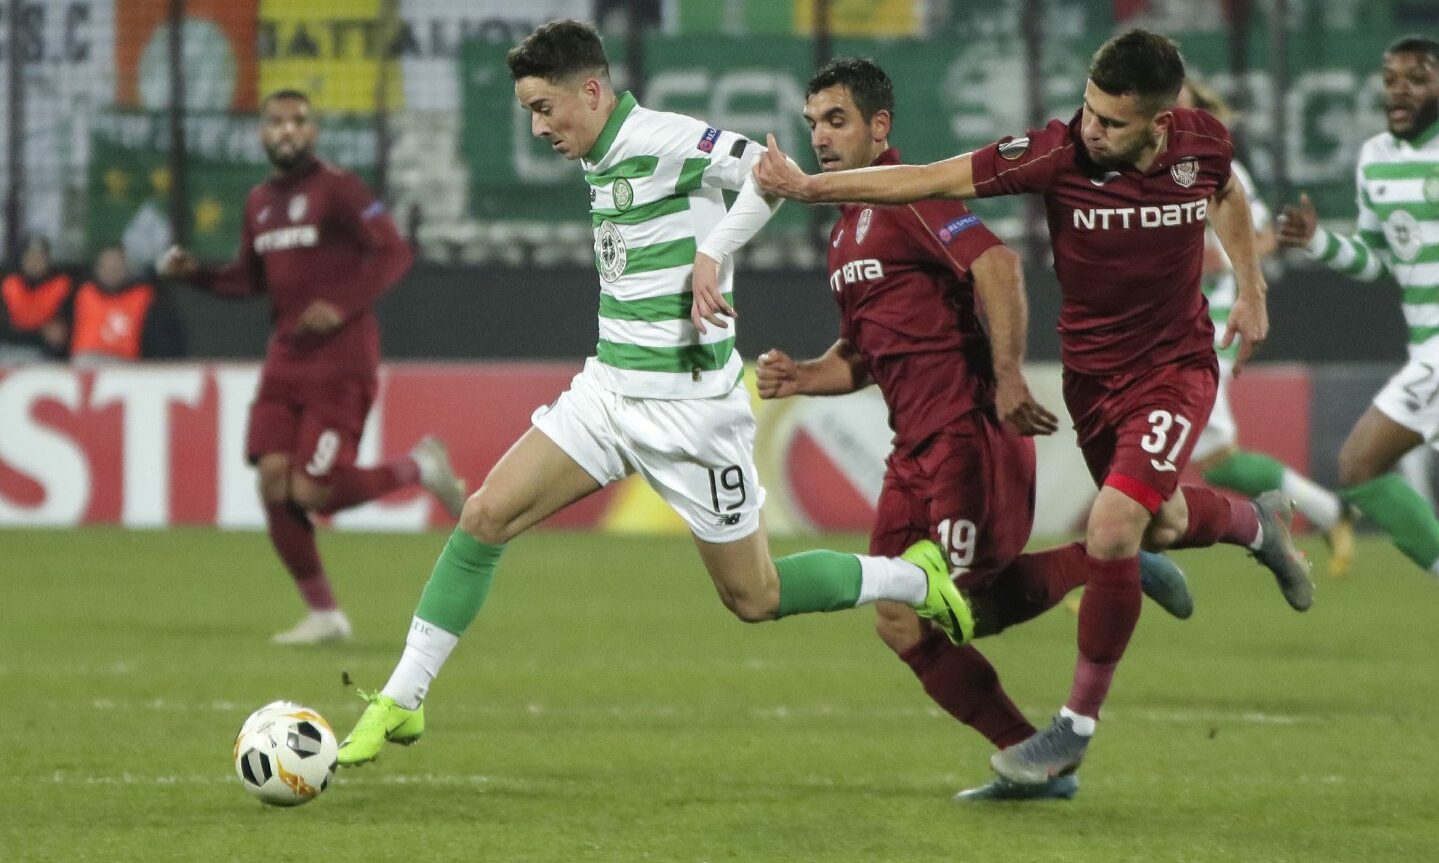 Celtic's Mikey Johnston, left, challenges for the ball with Cluj's Mihai Bordeianu, left, during a Europa League match.